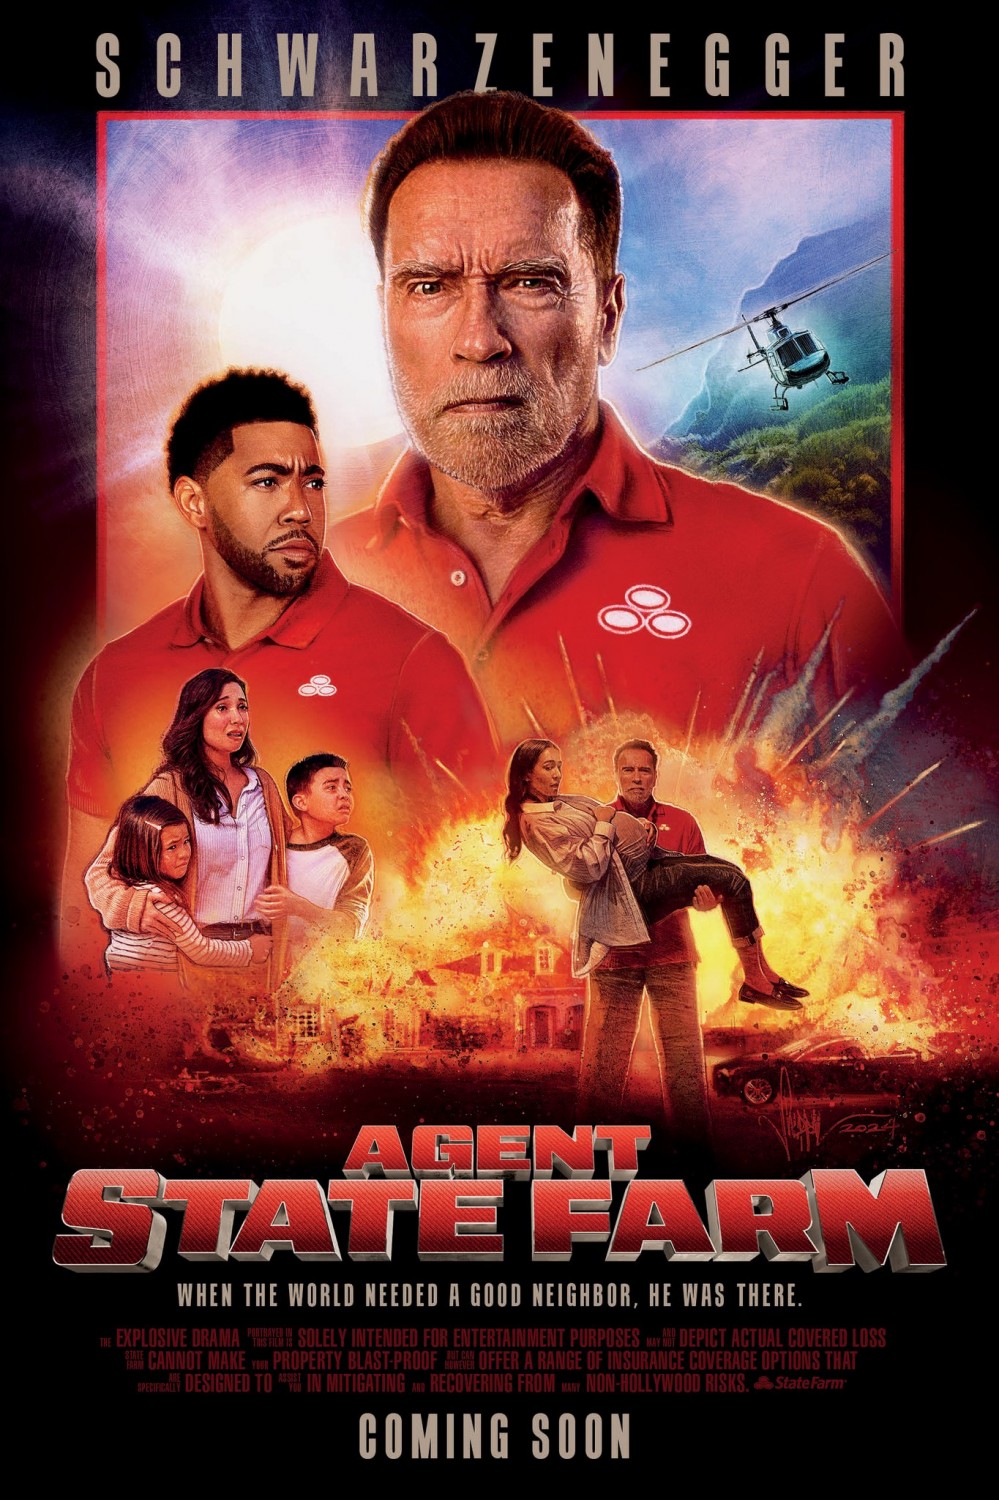 Extra Large Movie Poster Image for Agent State Farm